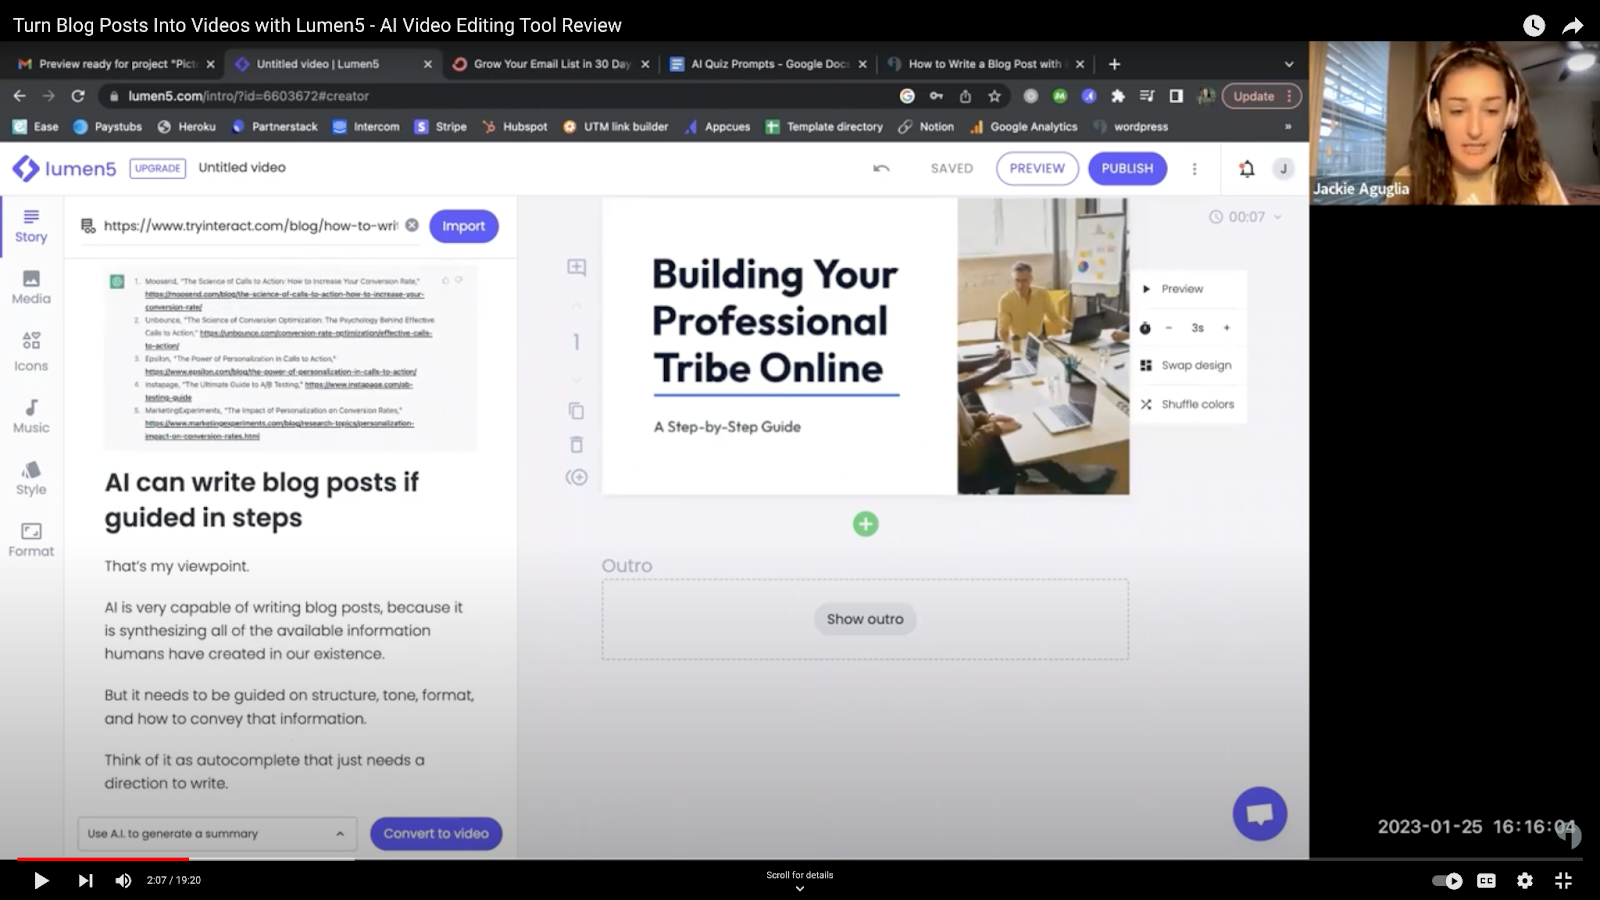 Screenshot of convert to video page in Lumen5 AI